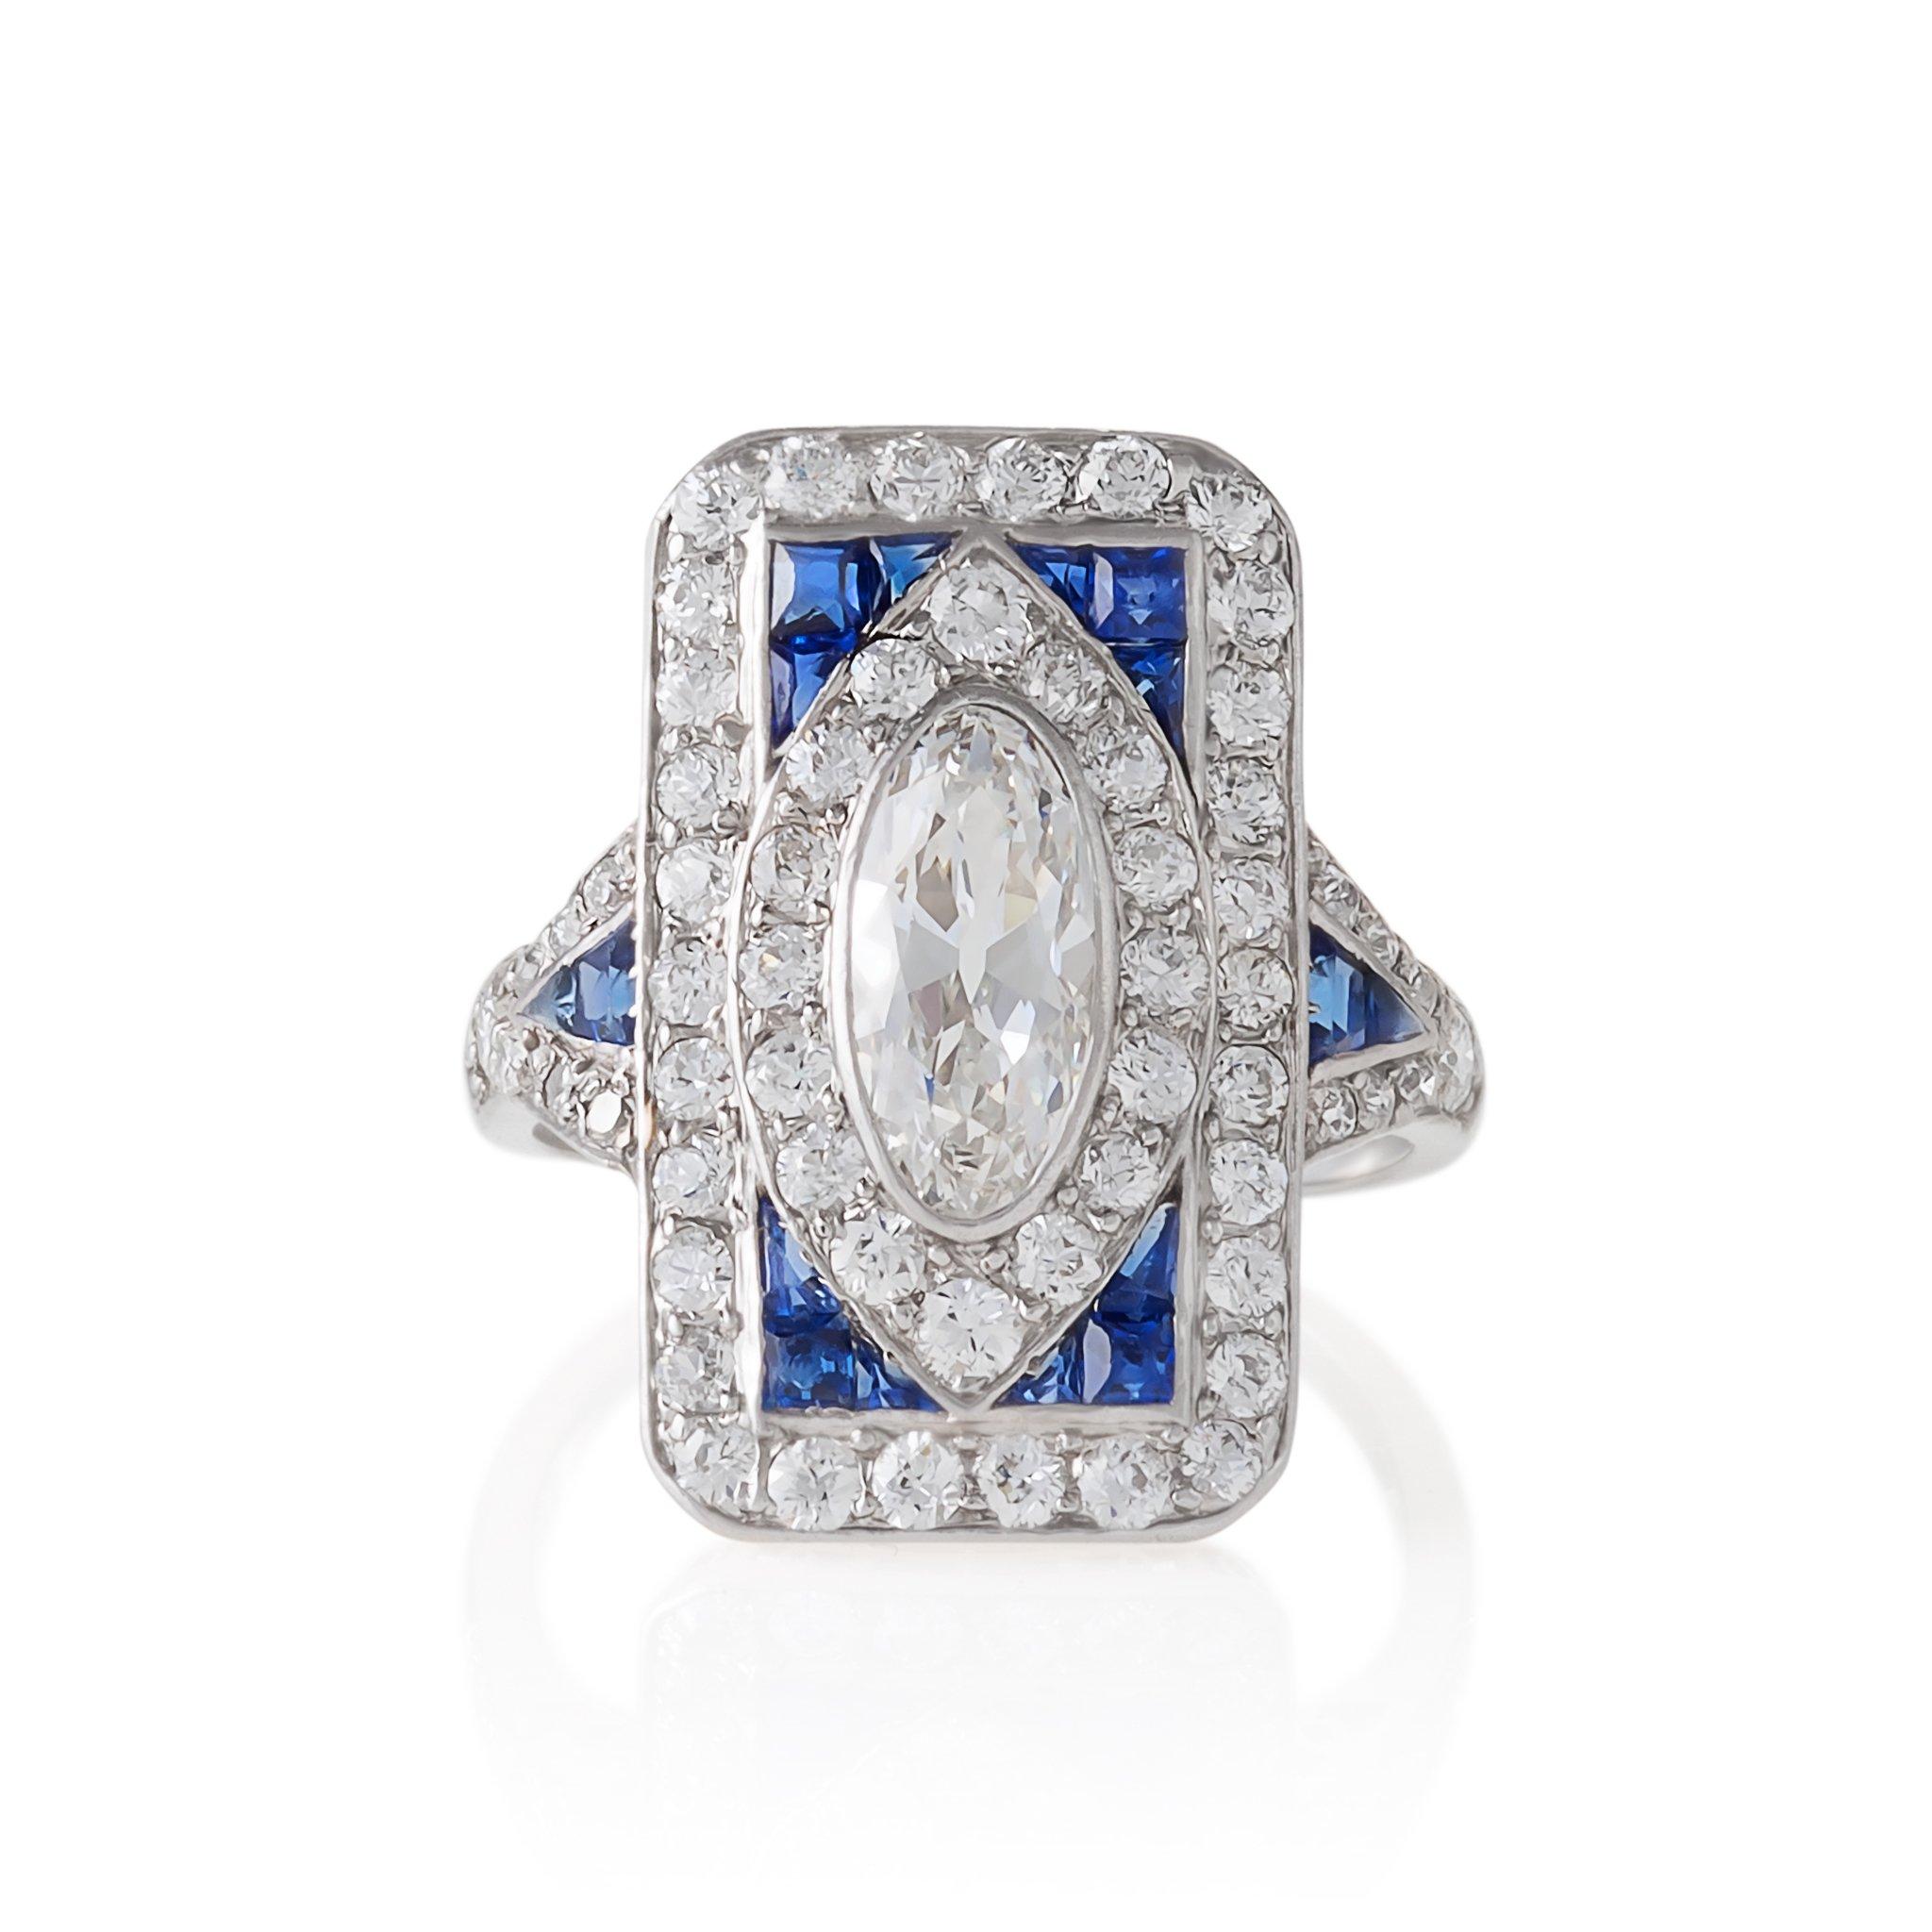 An Art Deco platinum ring with diamonds and sapphires. The ring has a center oval diamond with an approximate total weight of .80 carat, I/J color, VS clarity and 60 old European-cut diamonds with an approximate total weight of 1.20 carats, and 12